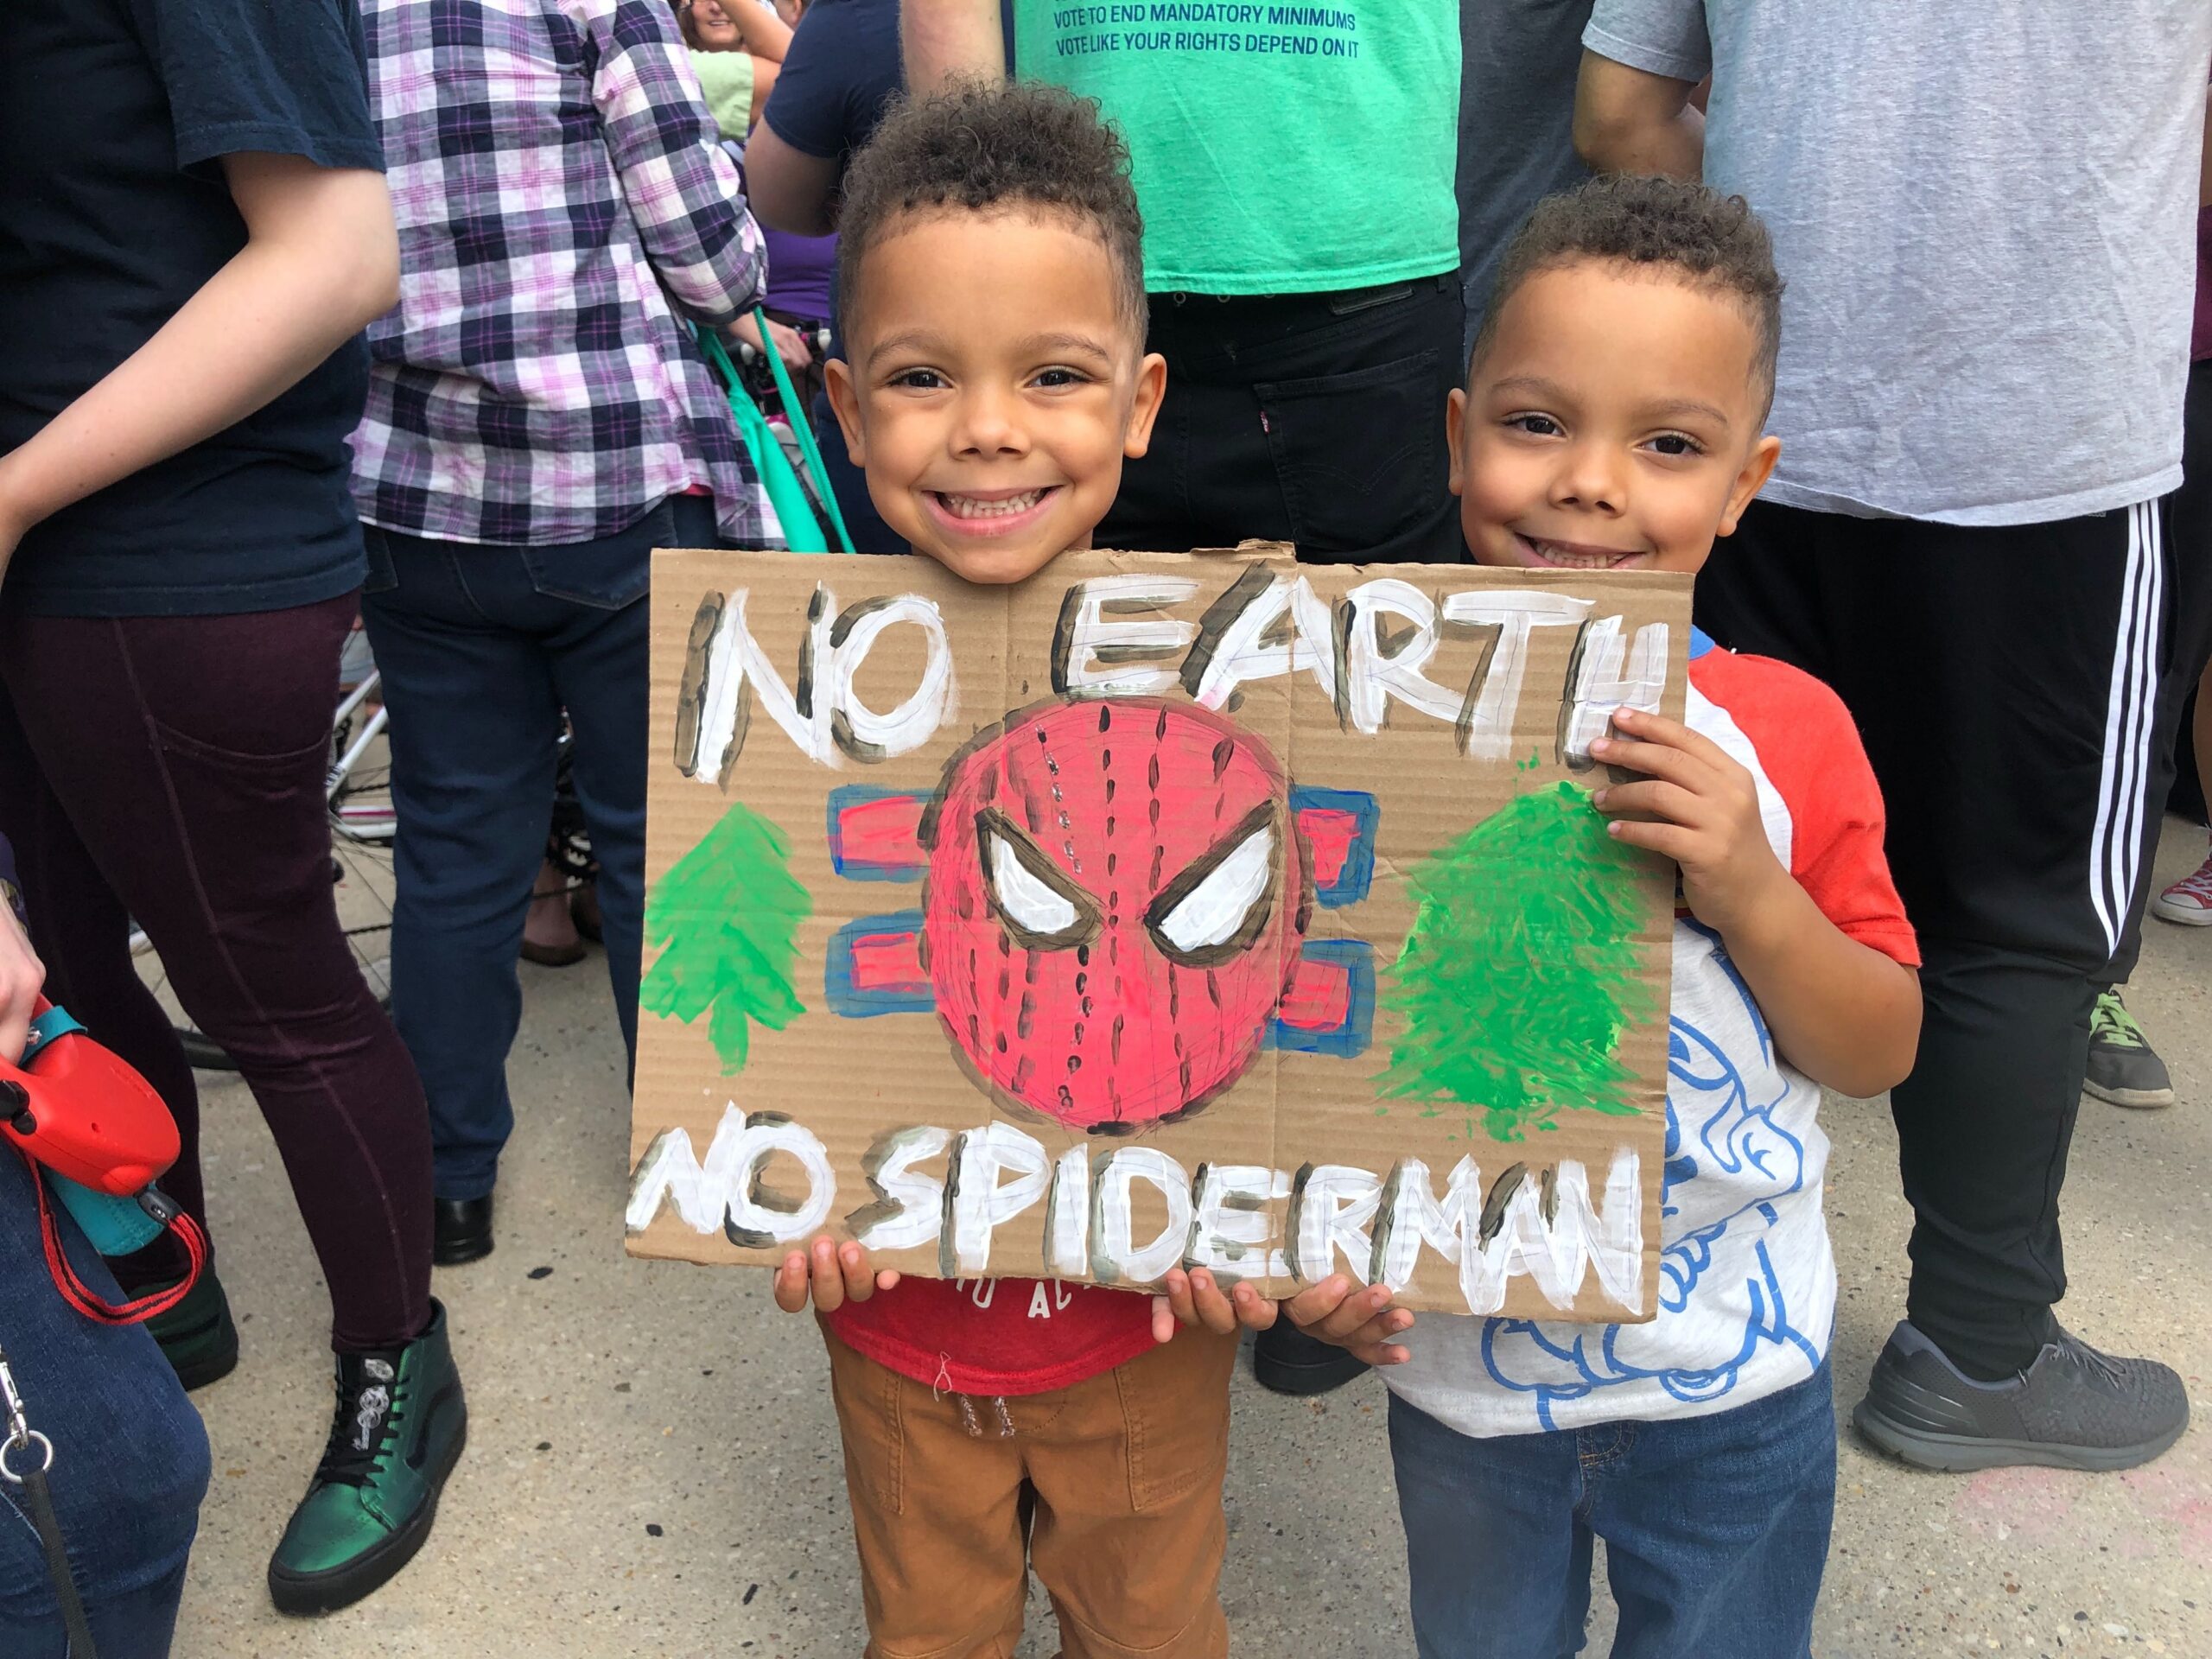 Brothers Finn and Oliver at the climate strike